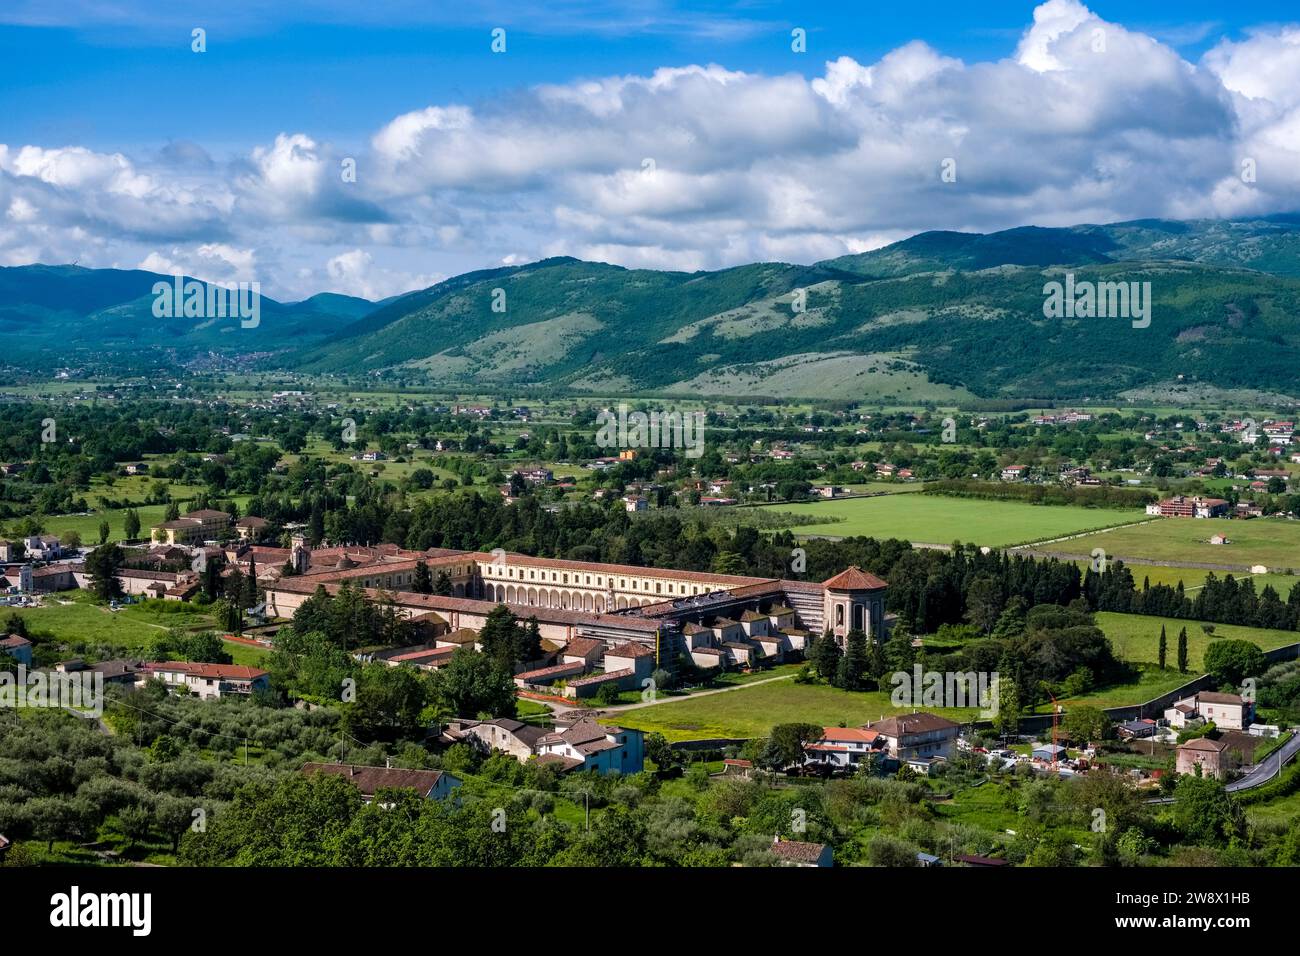 Aerial view of Padula Charterhouse, Certosa di Padula, the largest Carthusian monastery in Italy, located in the Val di Tanagro valley. Stock Photo